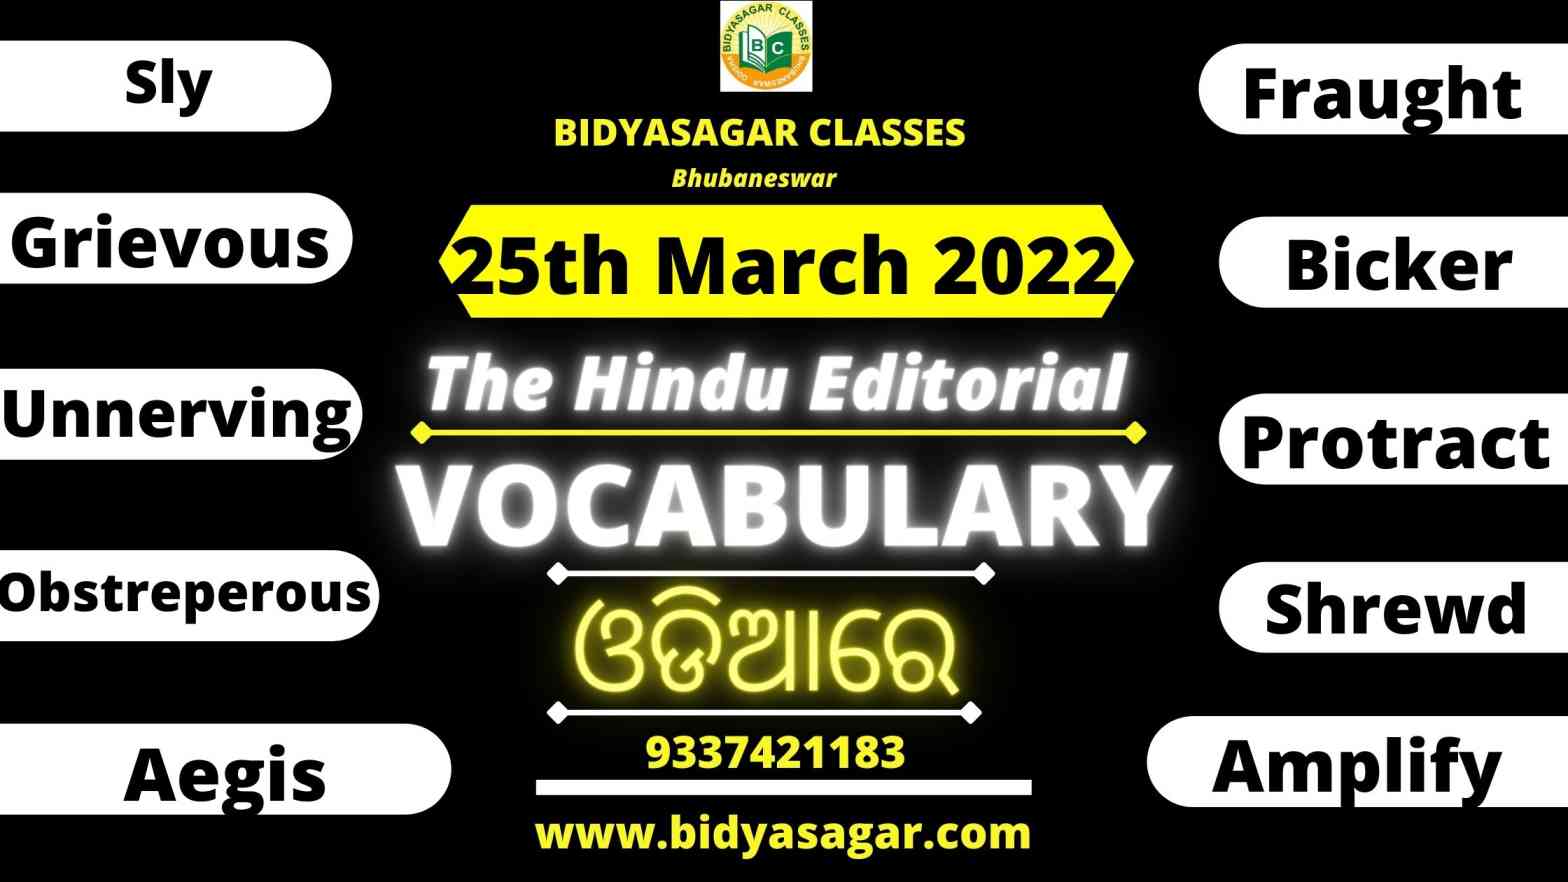 The Hindu Editorial Vocabulary of 25th March 2022